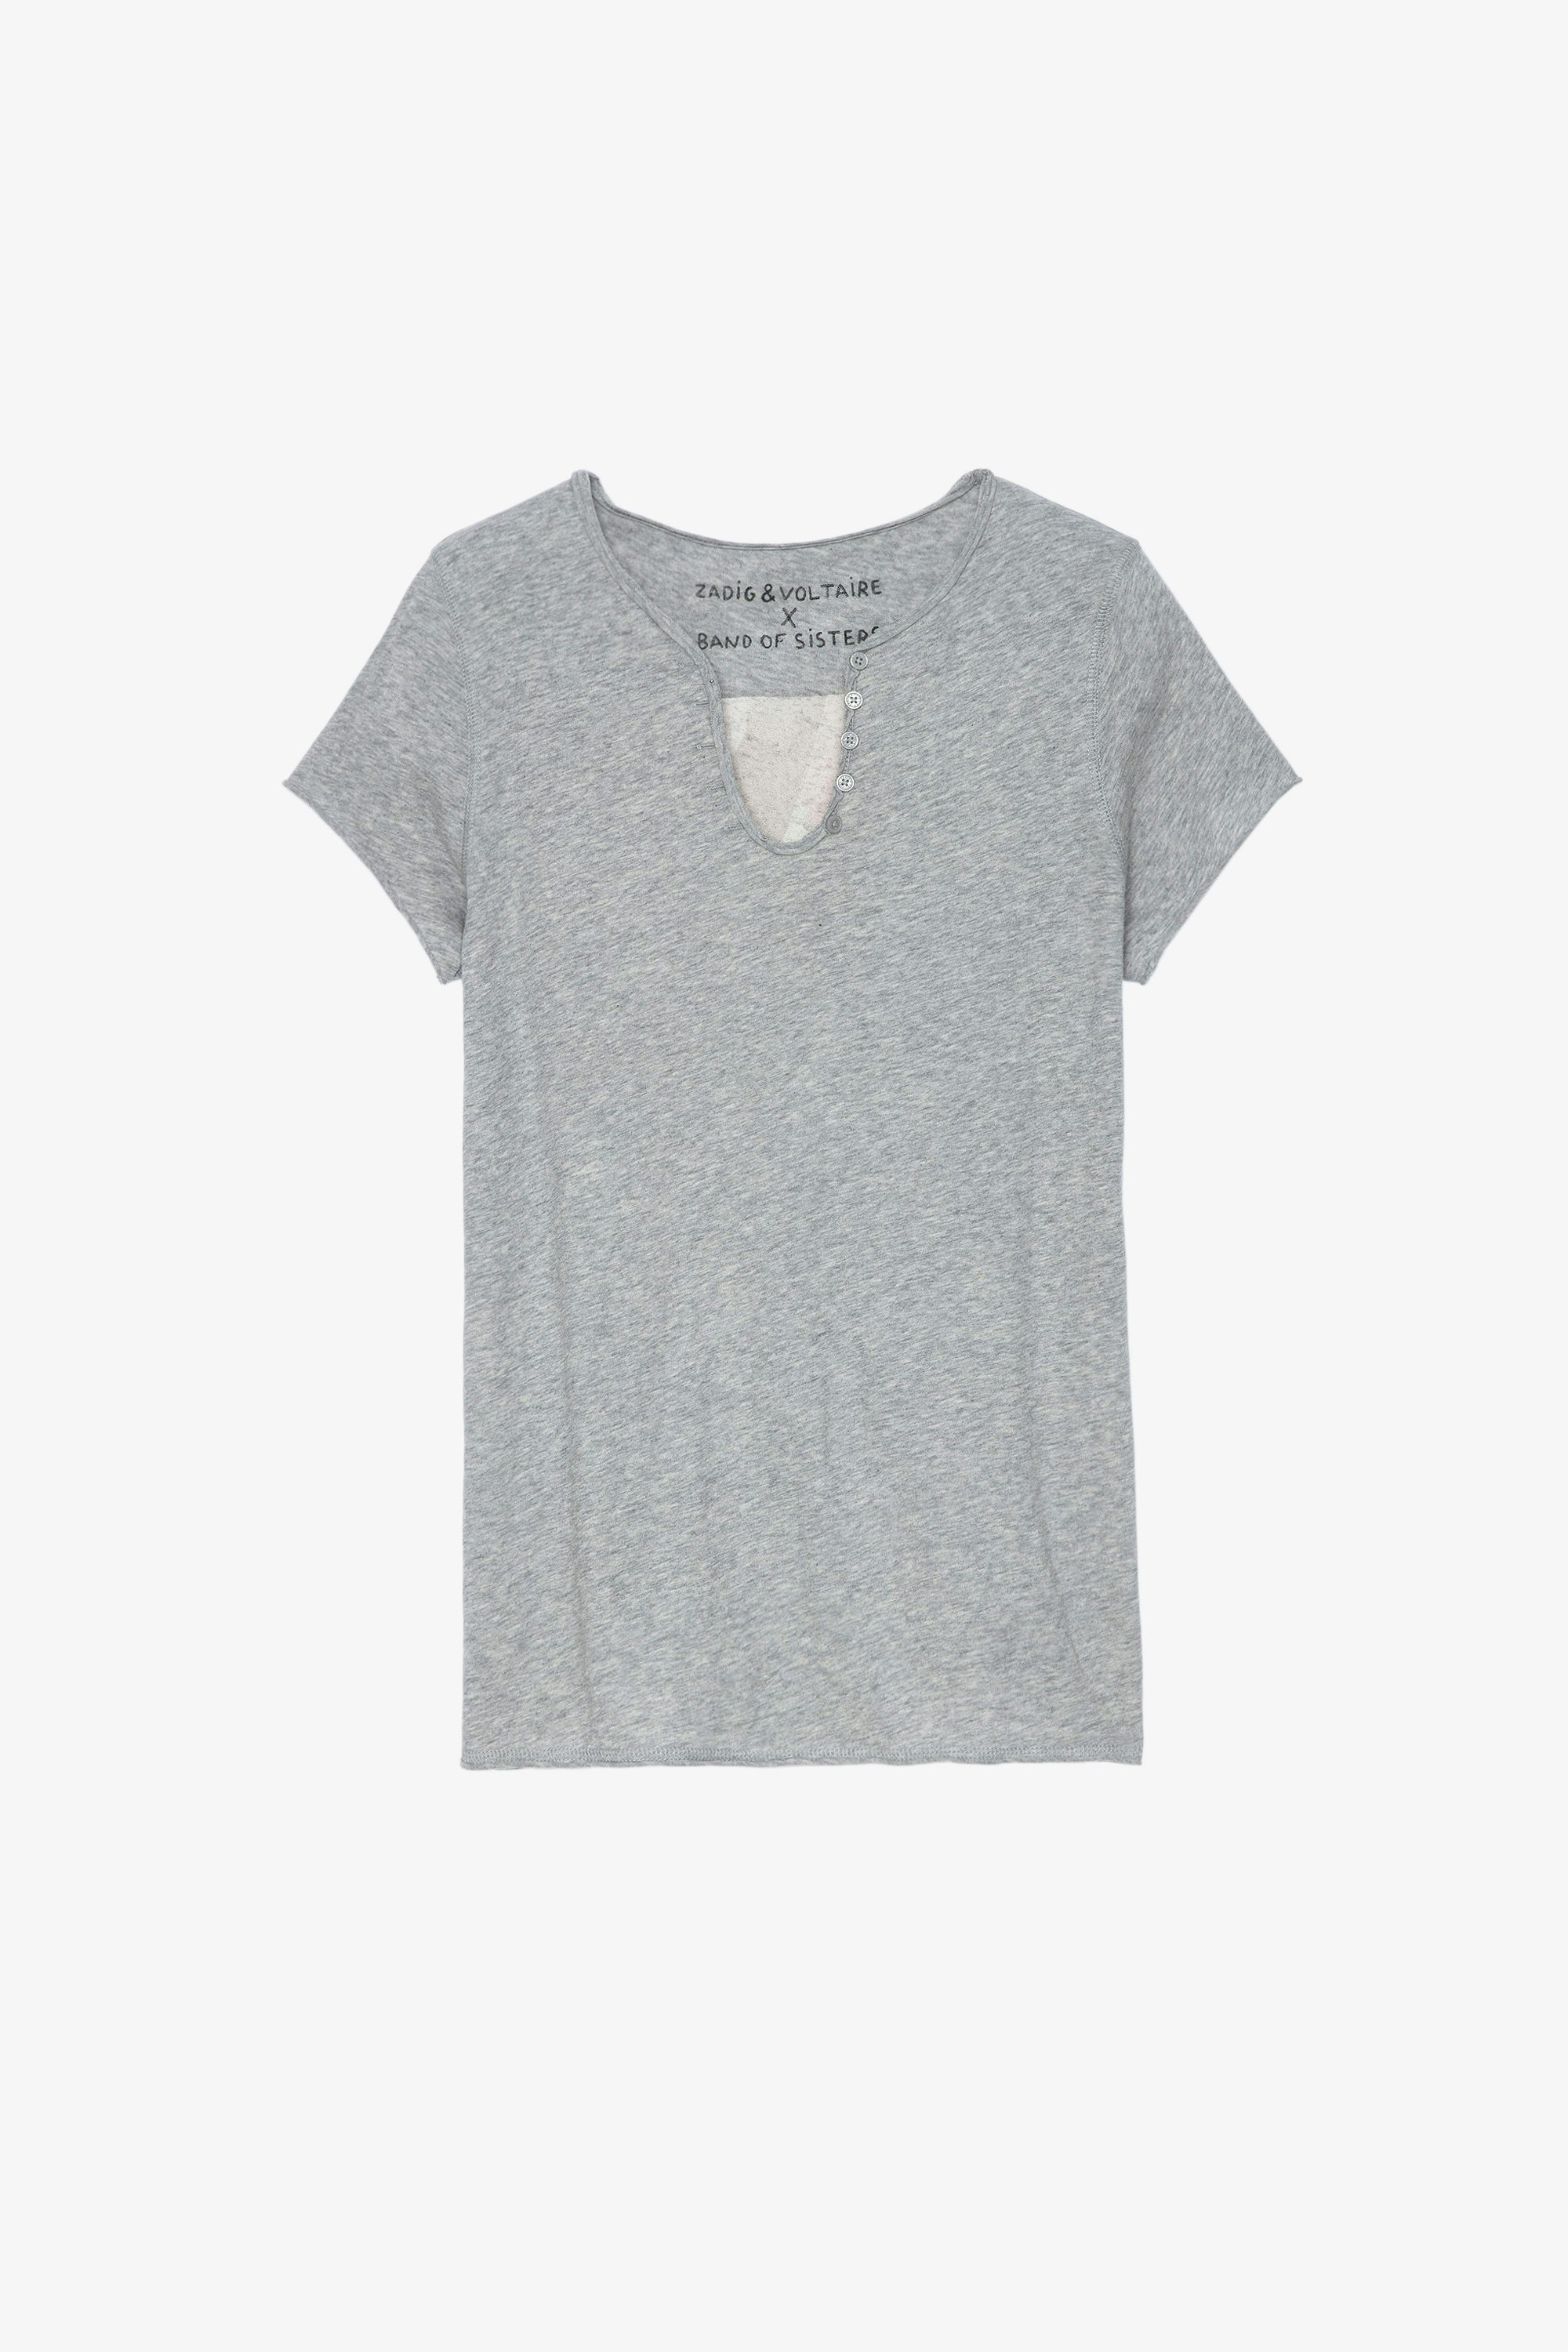 Band of Sisters Henley T-shirt Women’s grey marl cotton T-shirt with Henley collar and Band of Sisters print